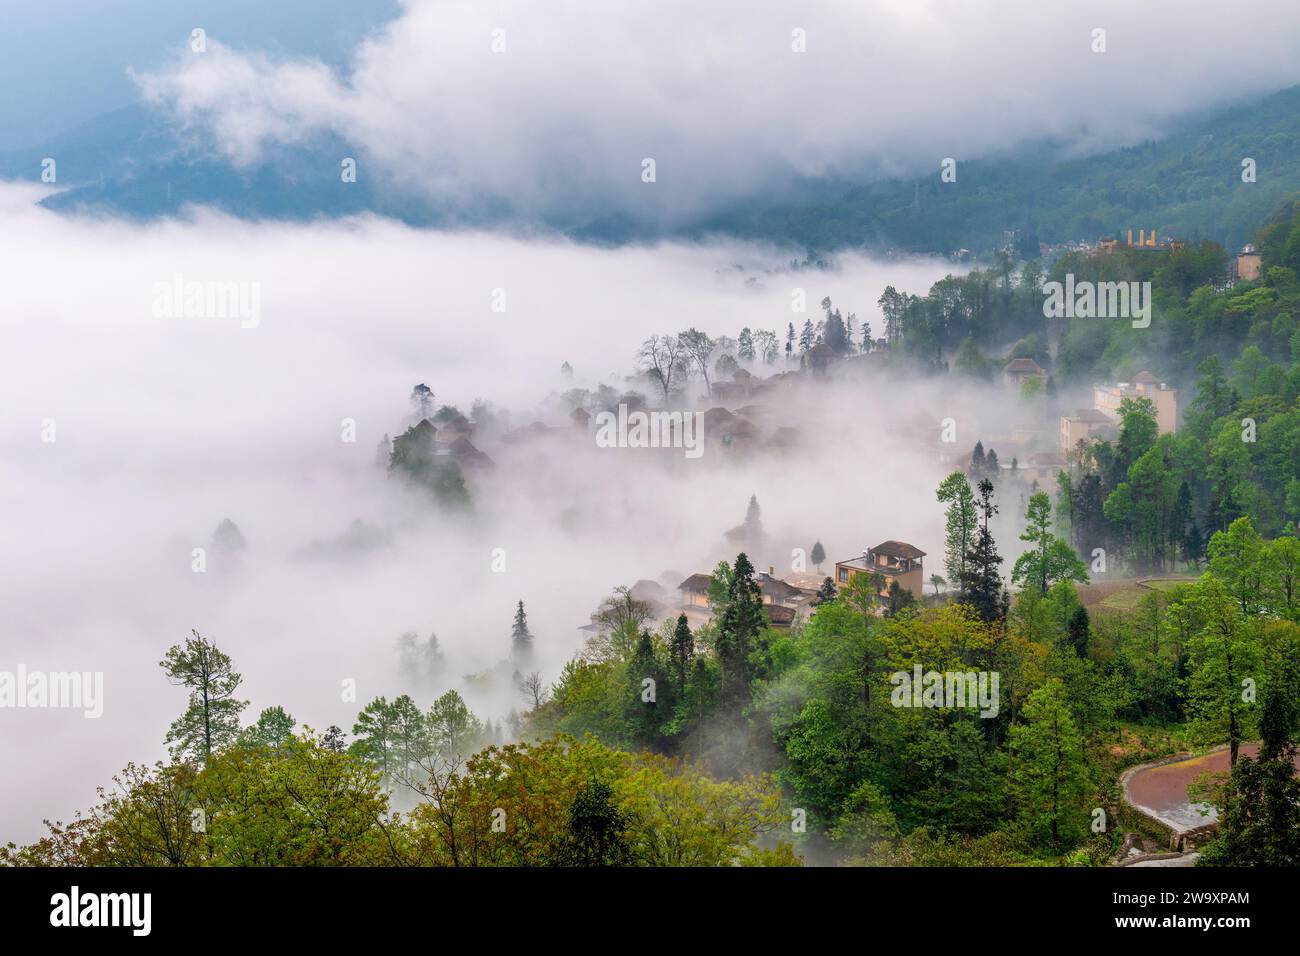 The cottage in the morning fog of Ailao Mountain, Yuanyang County, Honghe Prefecture, Yunnan Province, China. Stock Photo